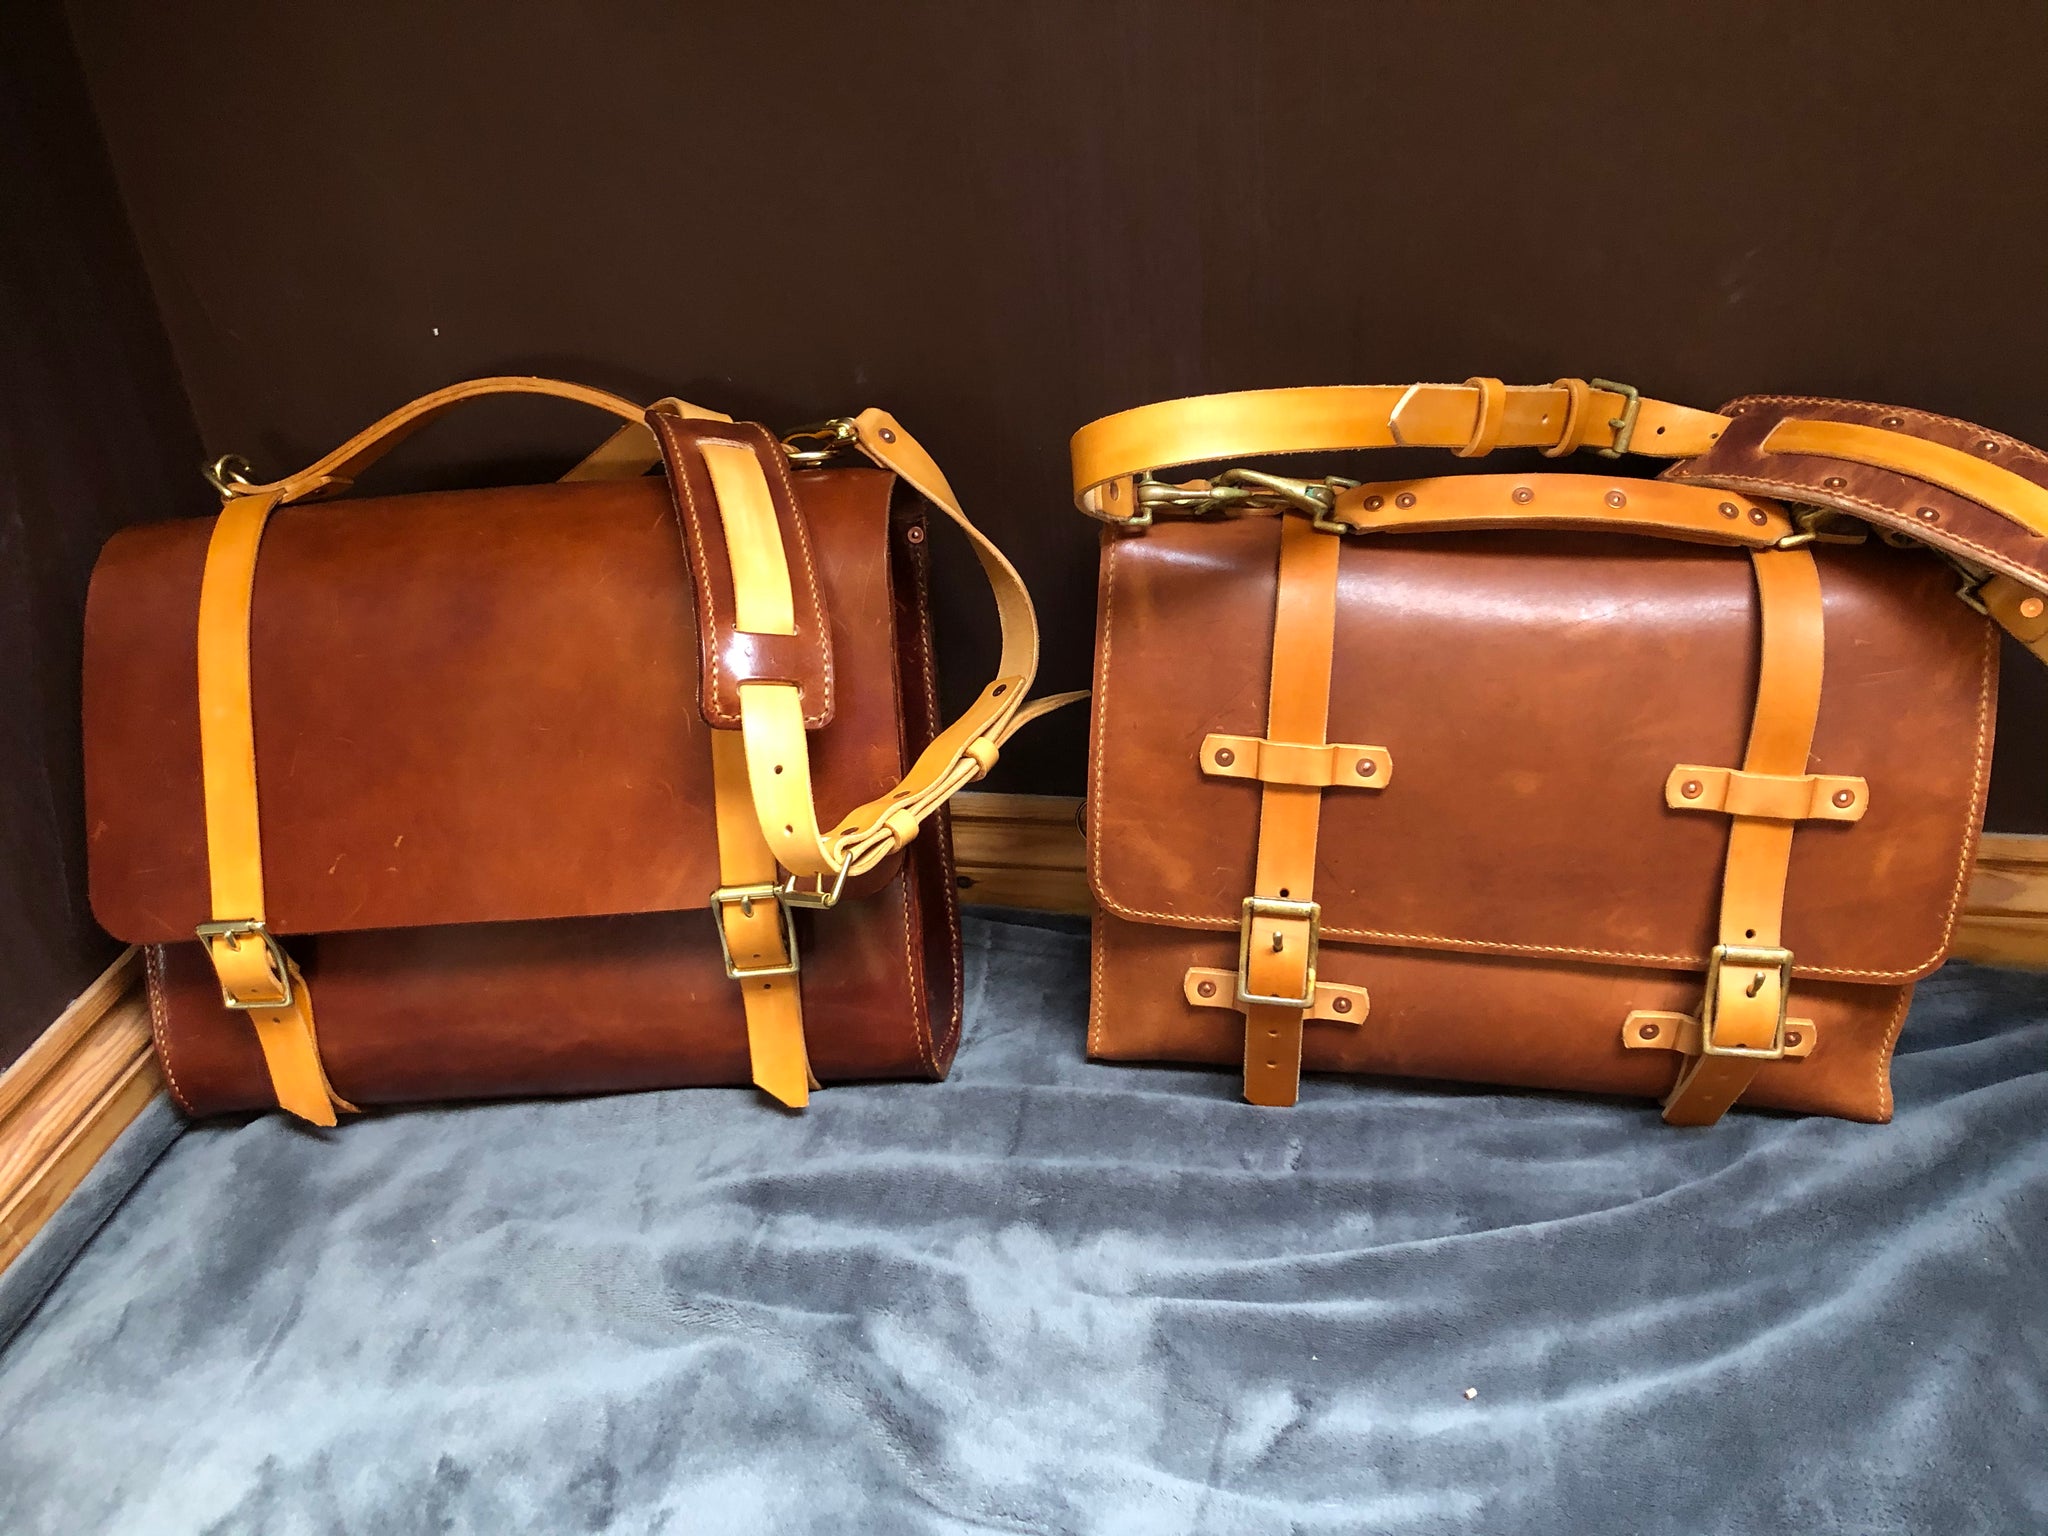 New Hand Stitched Leather Bag Designs